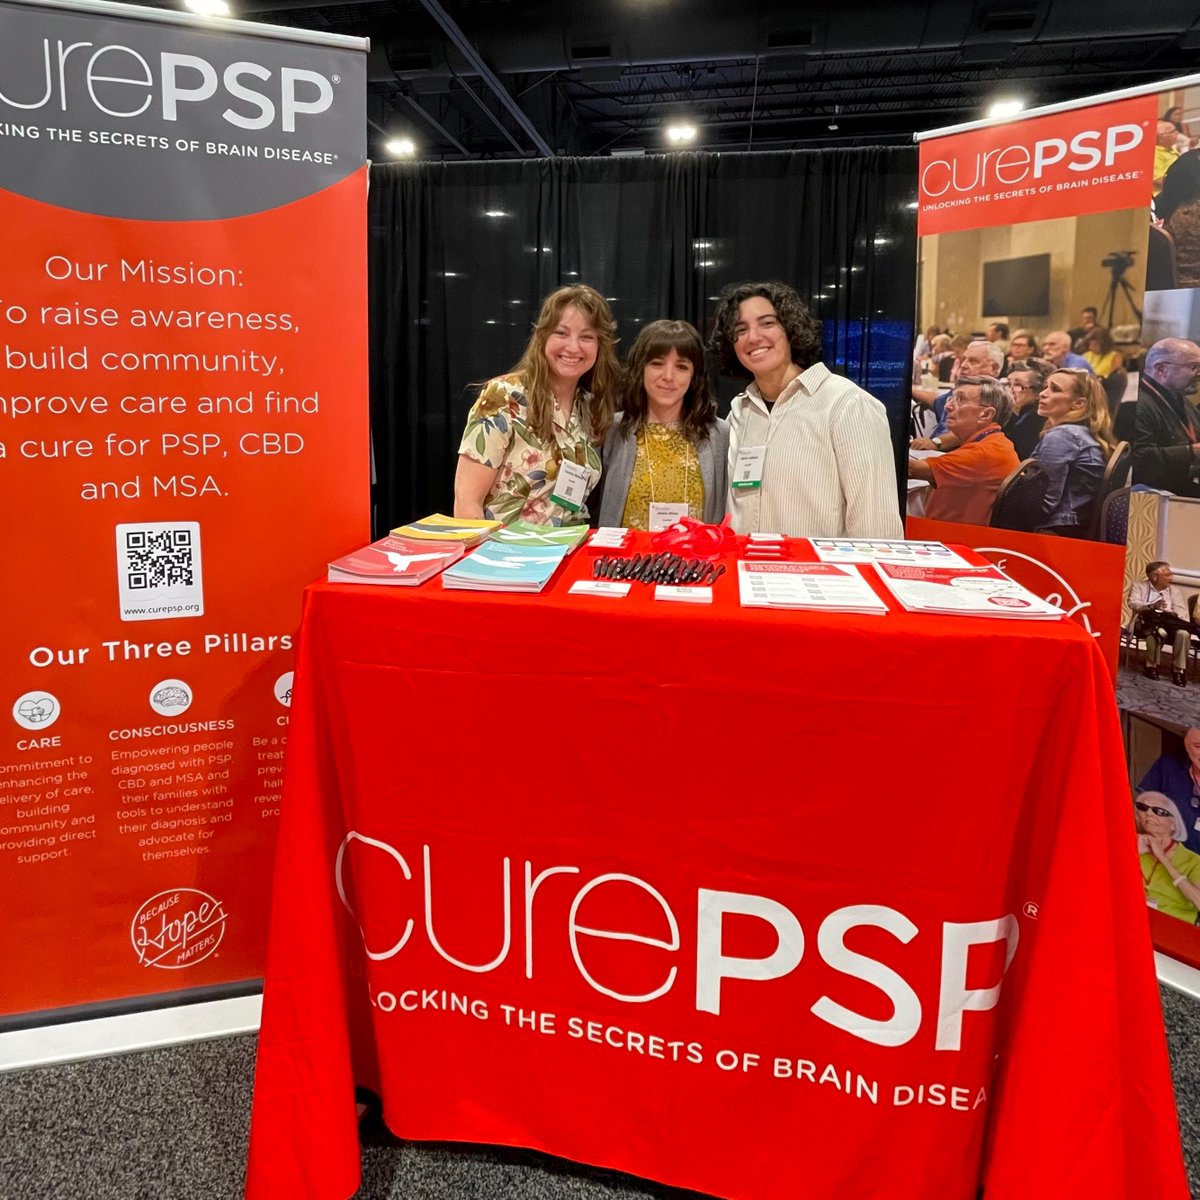 Our team is thrilled to be part of the biggest gathering of neurologists worldwide at #AANAM!🧠Swing by booth 665 to meet us and join the excitement. Let's cultivate meaningful connections together!